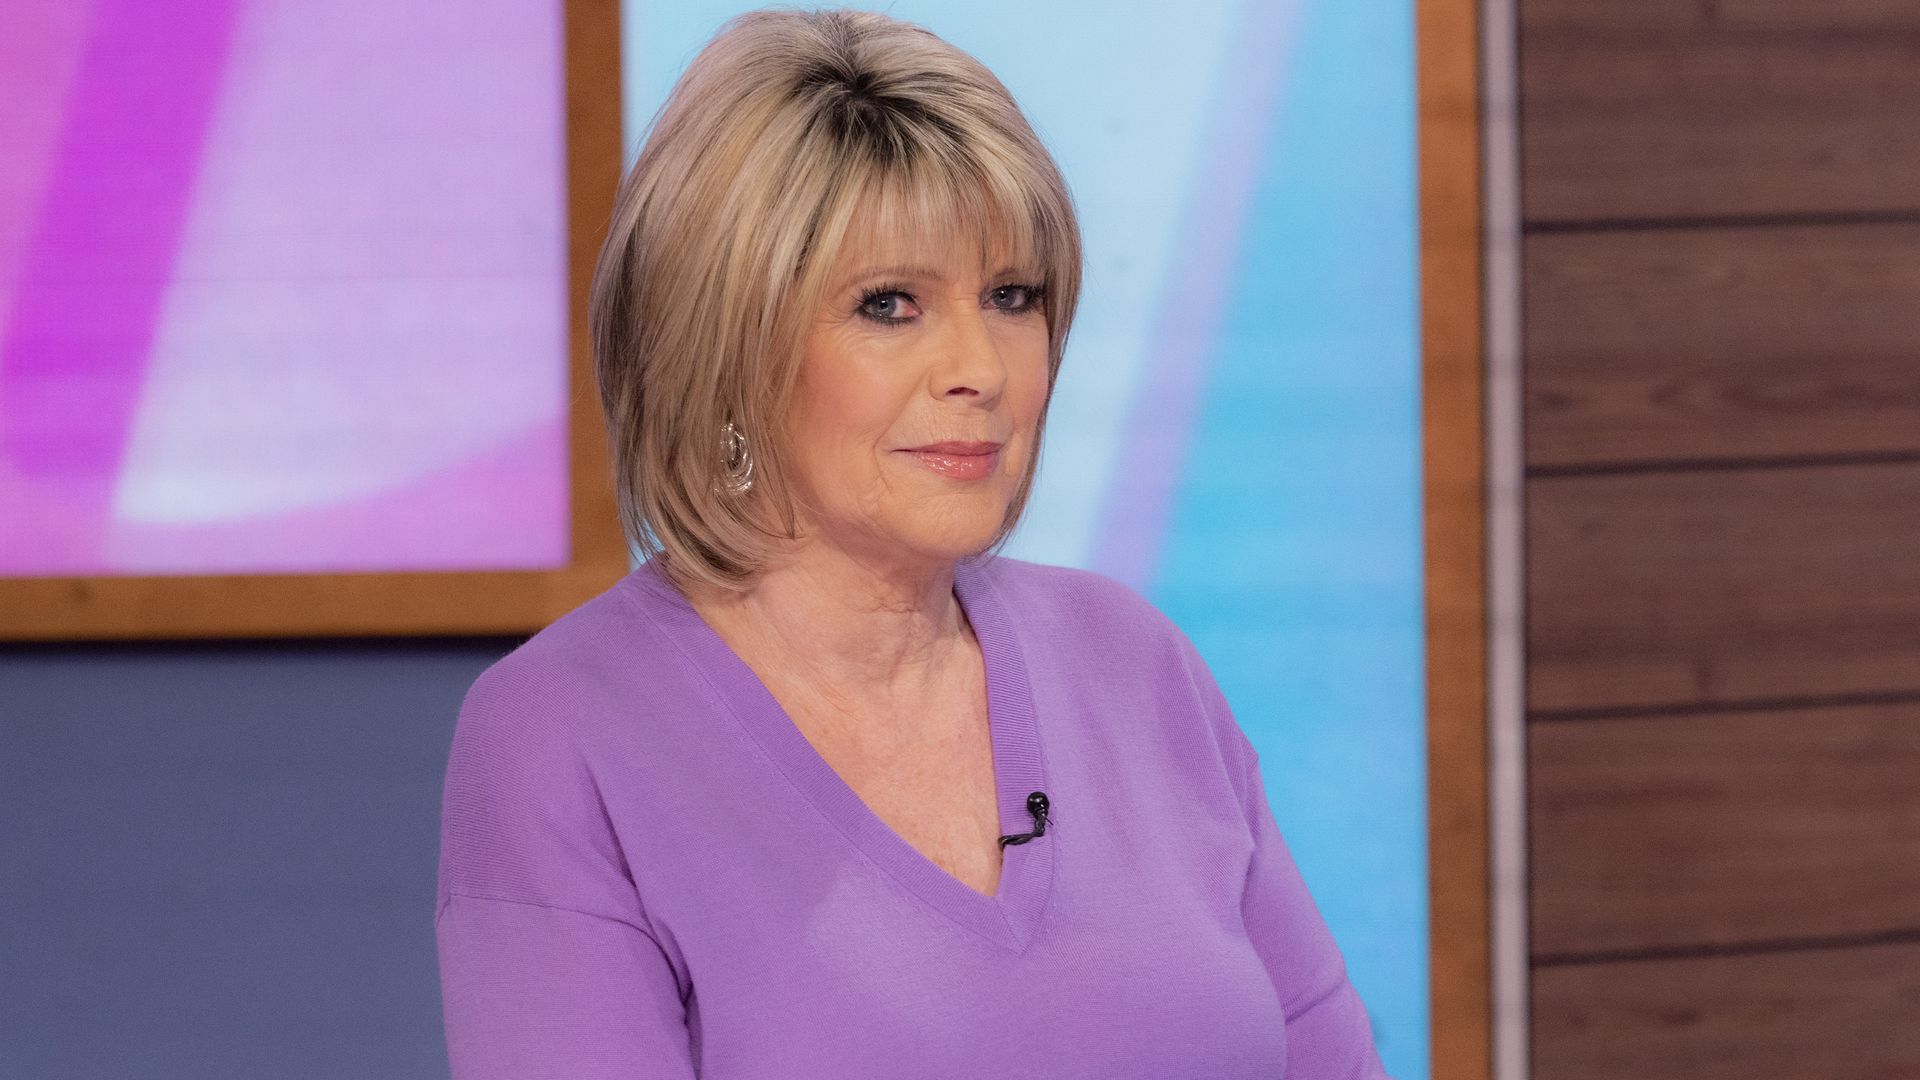 Ruth Langsford in a purple top on Loose Women